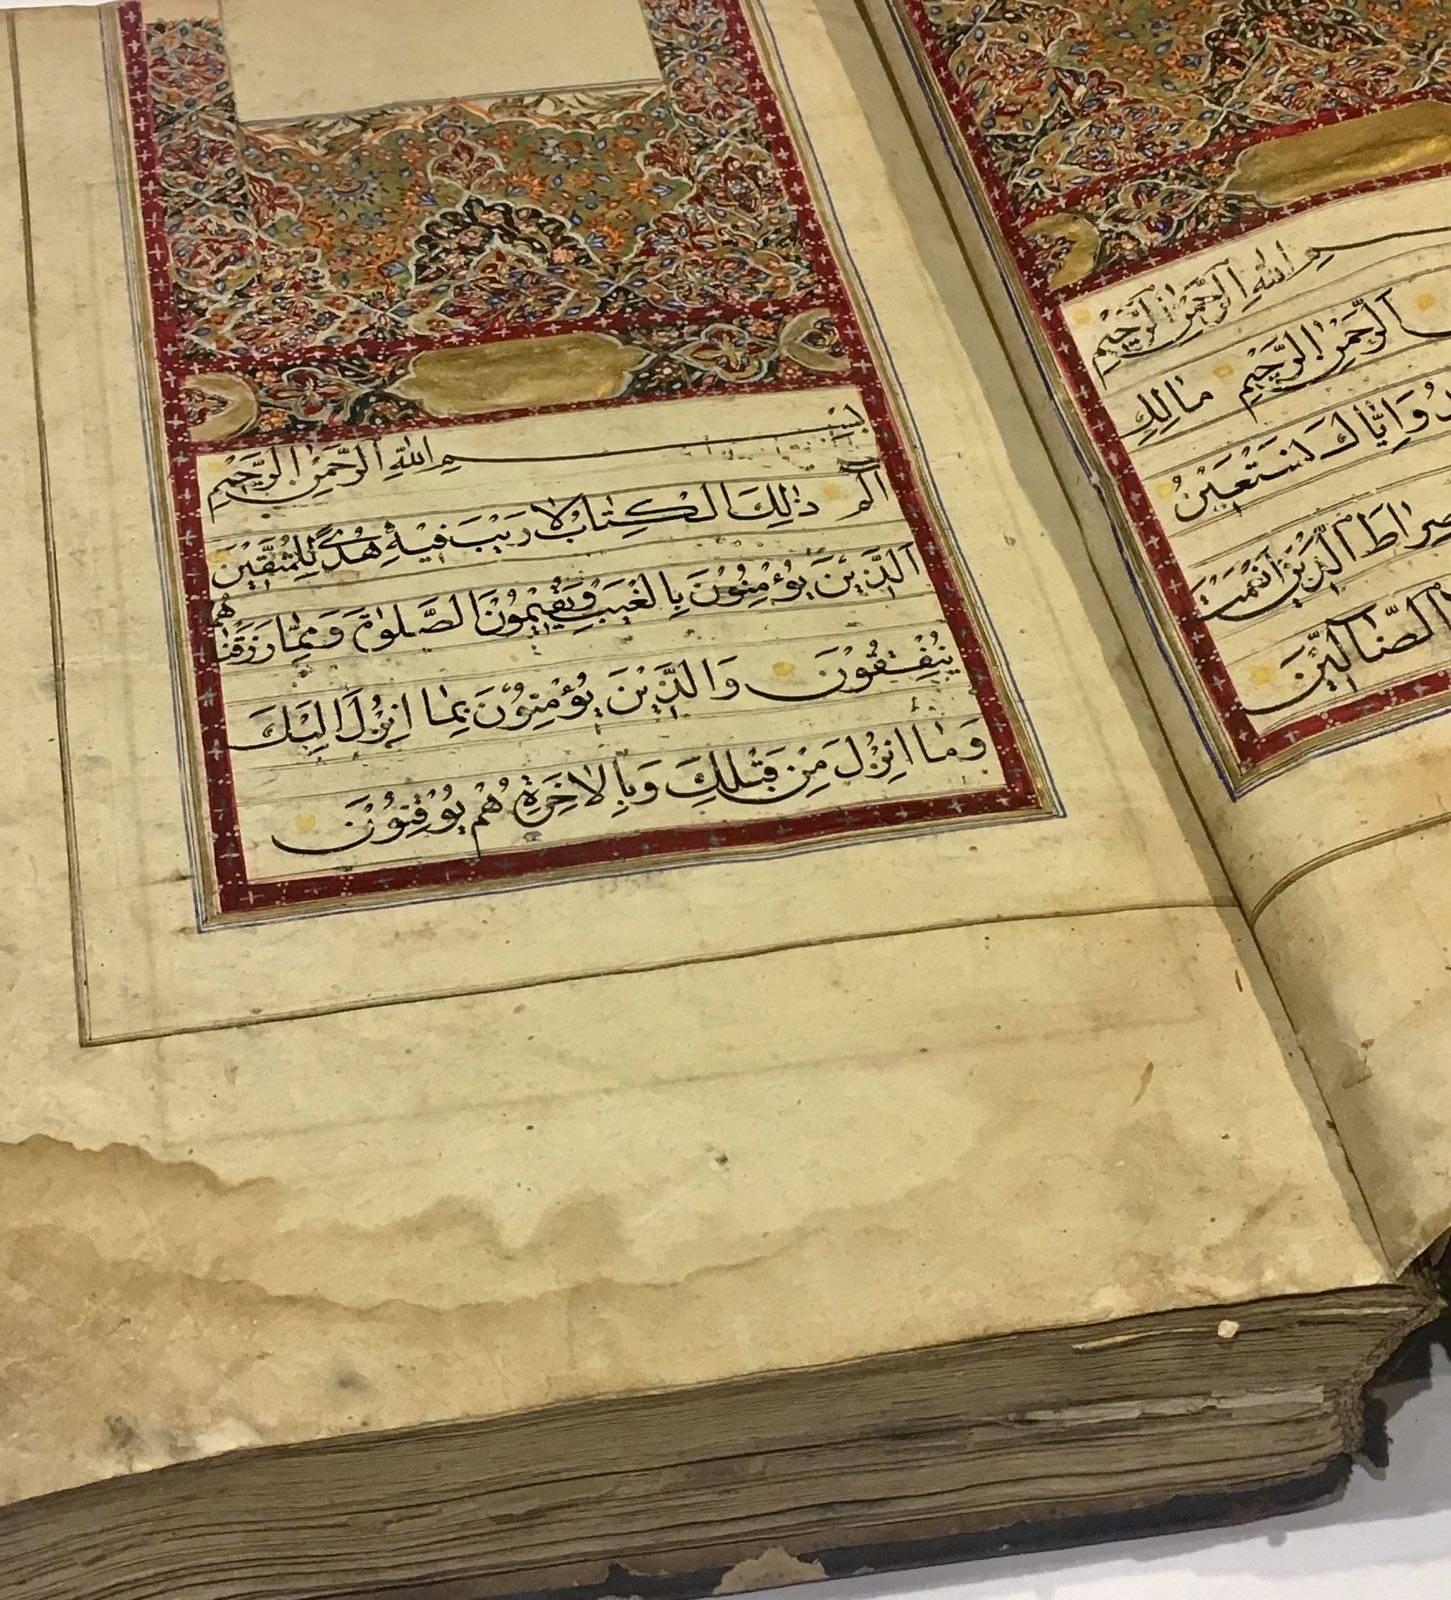 This beautiful Qur'an is 164 years old by Abdullah Bin Hussien.
The Qajar dynasty was an Iranian royal dynasty of Turkic origin, specifically from the Qajar tribe, which ruled Persia from 1785 to 1925. The state ruled by the dynasty was officially